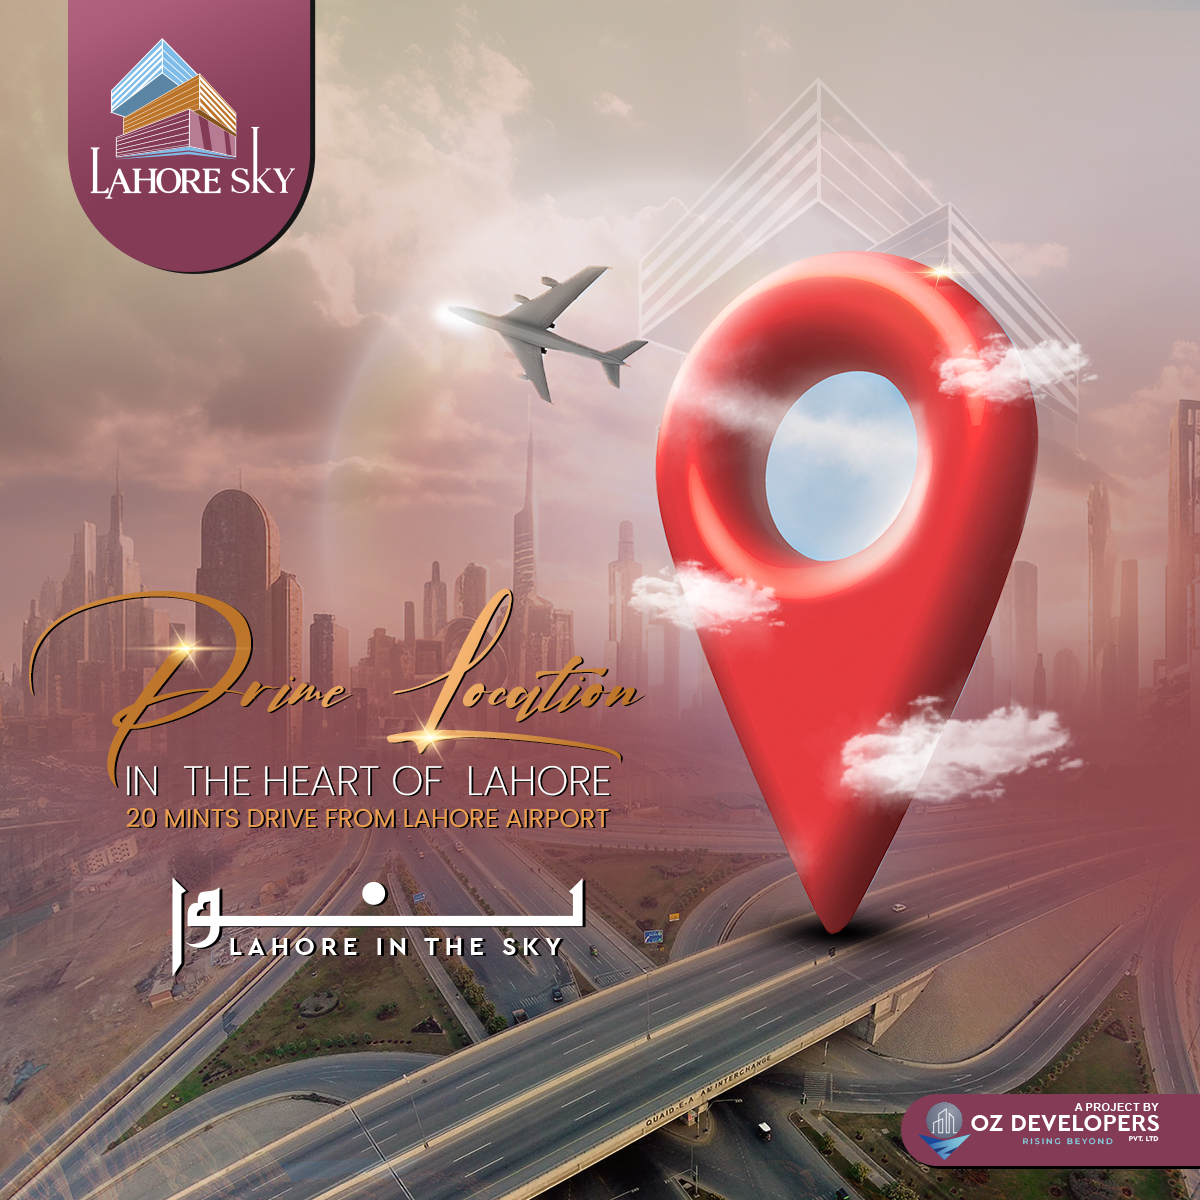 LAHORE SKY’S IDEAL LOCATION: A Paradigm of Urban Connectivity